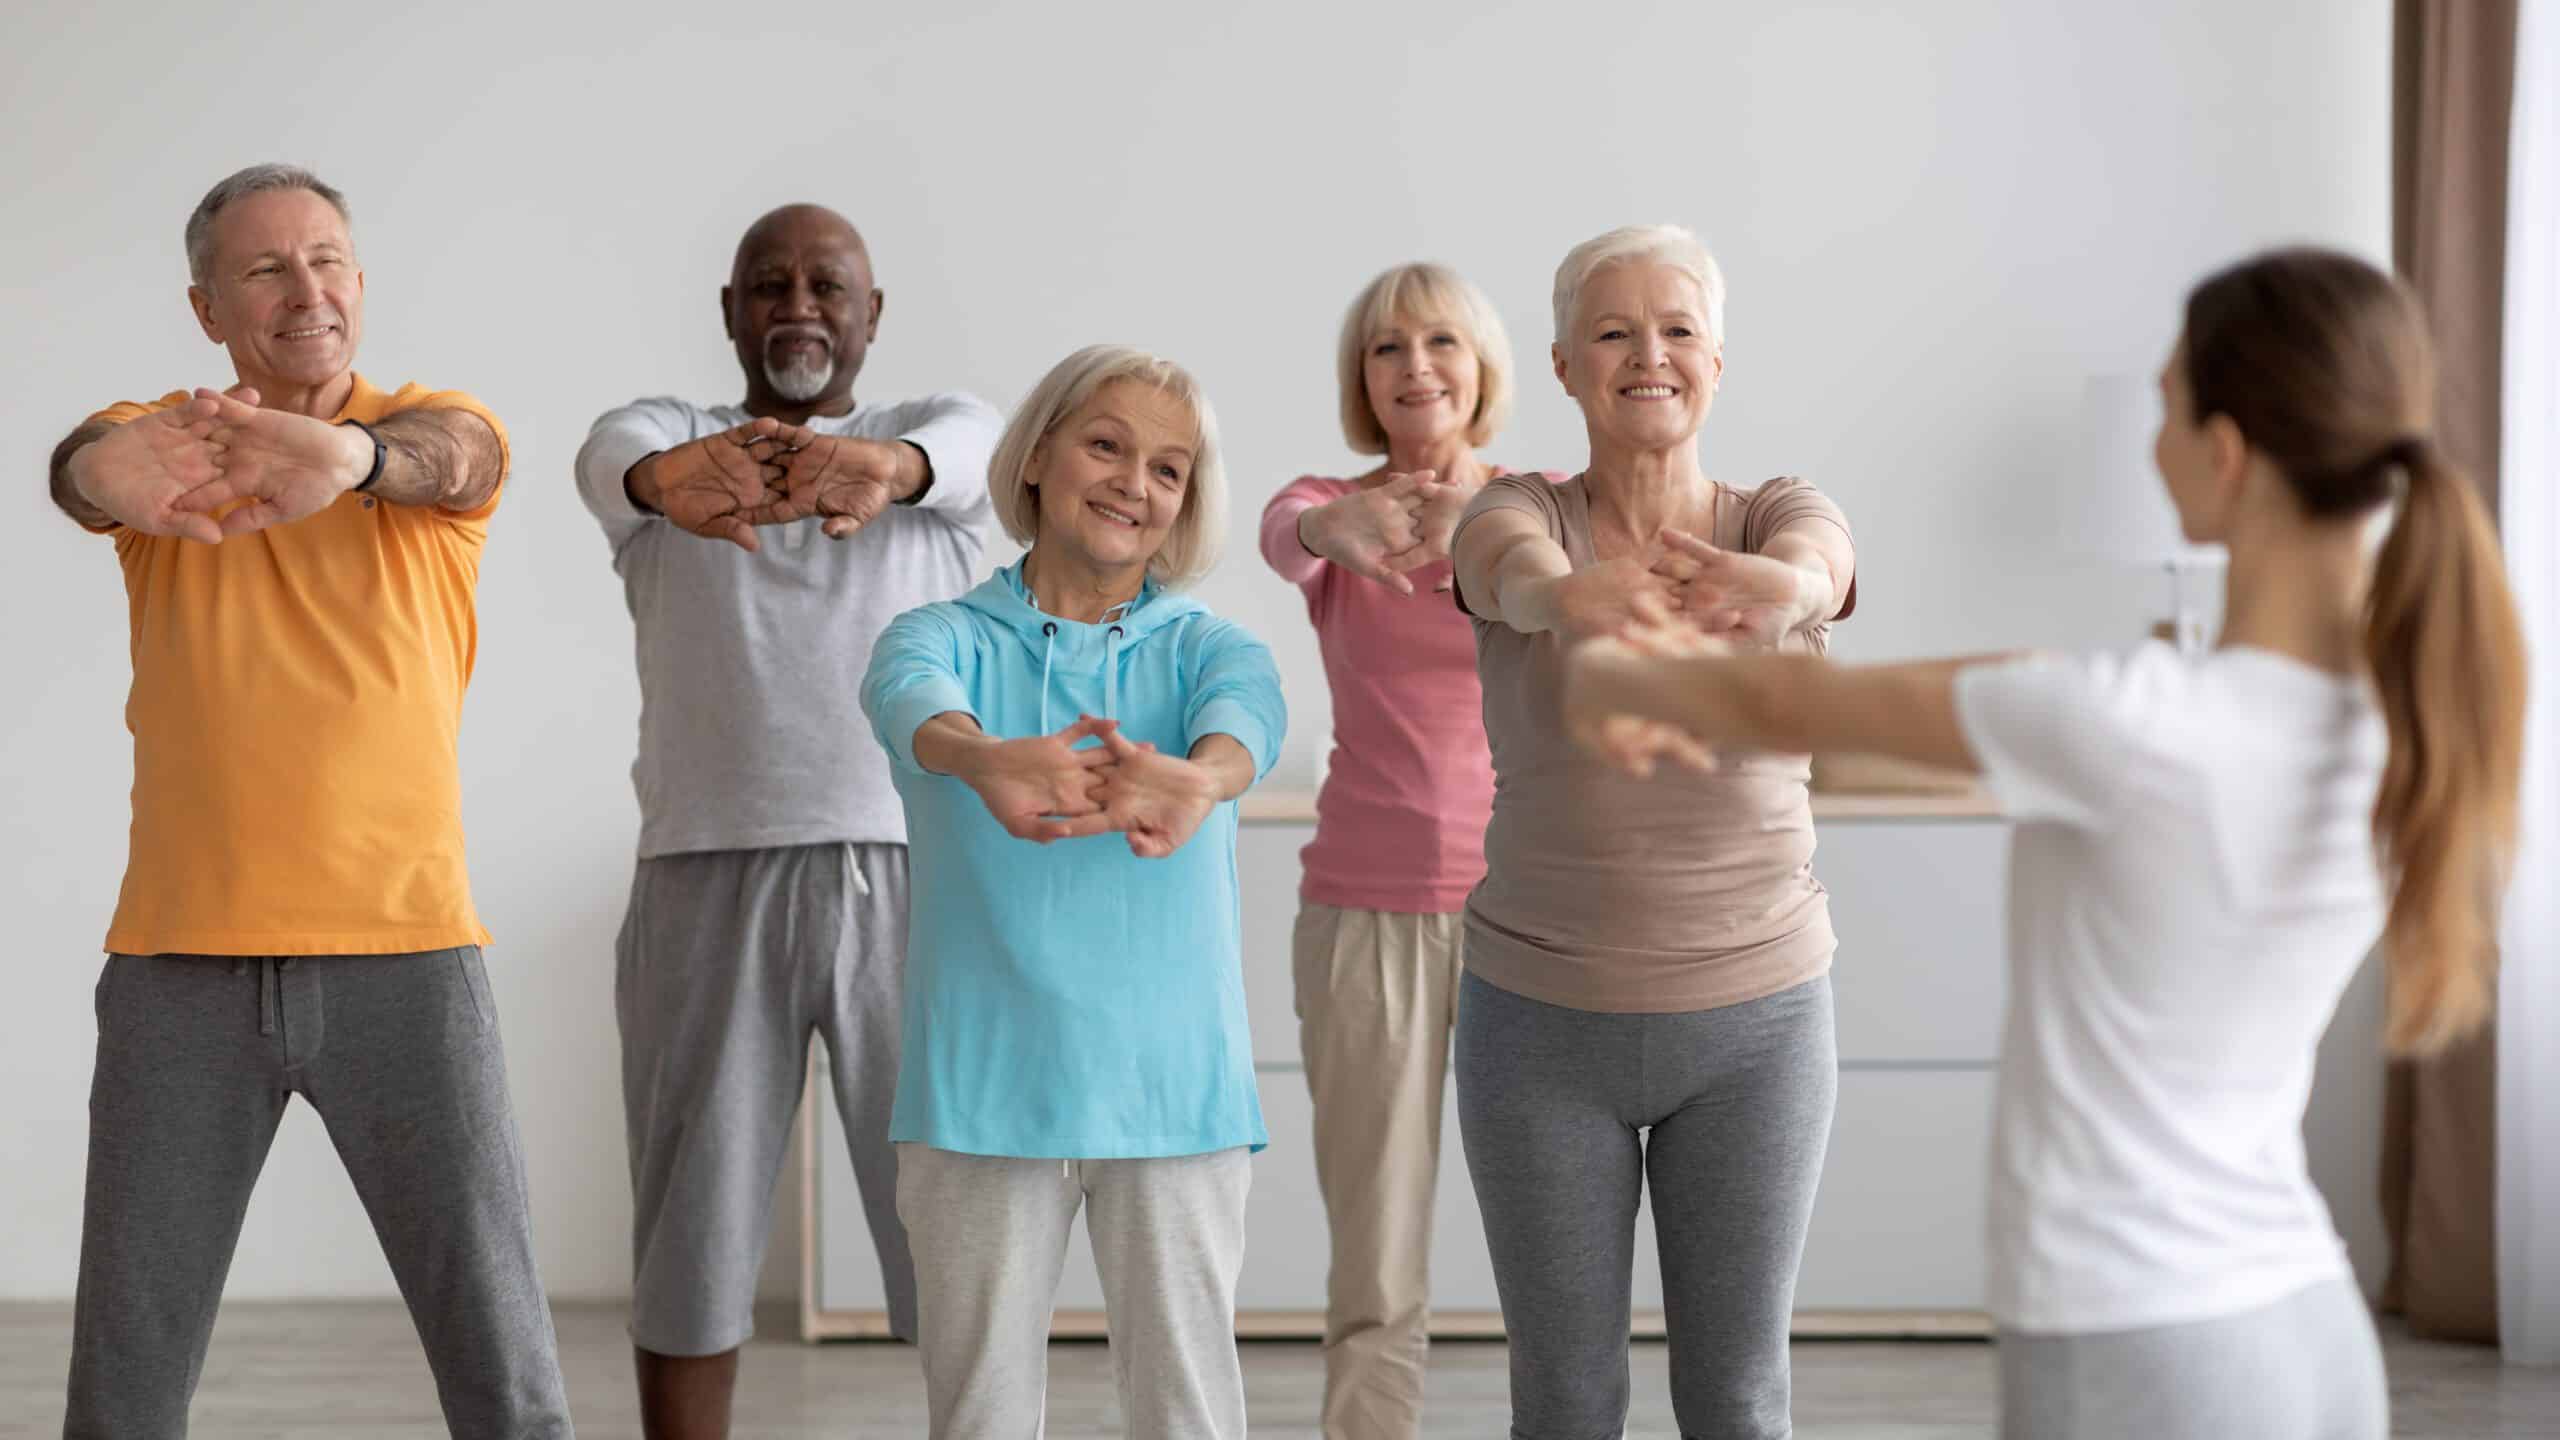 Workouts for Seniors: How to Exercise Without Overexertion